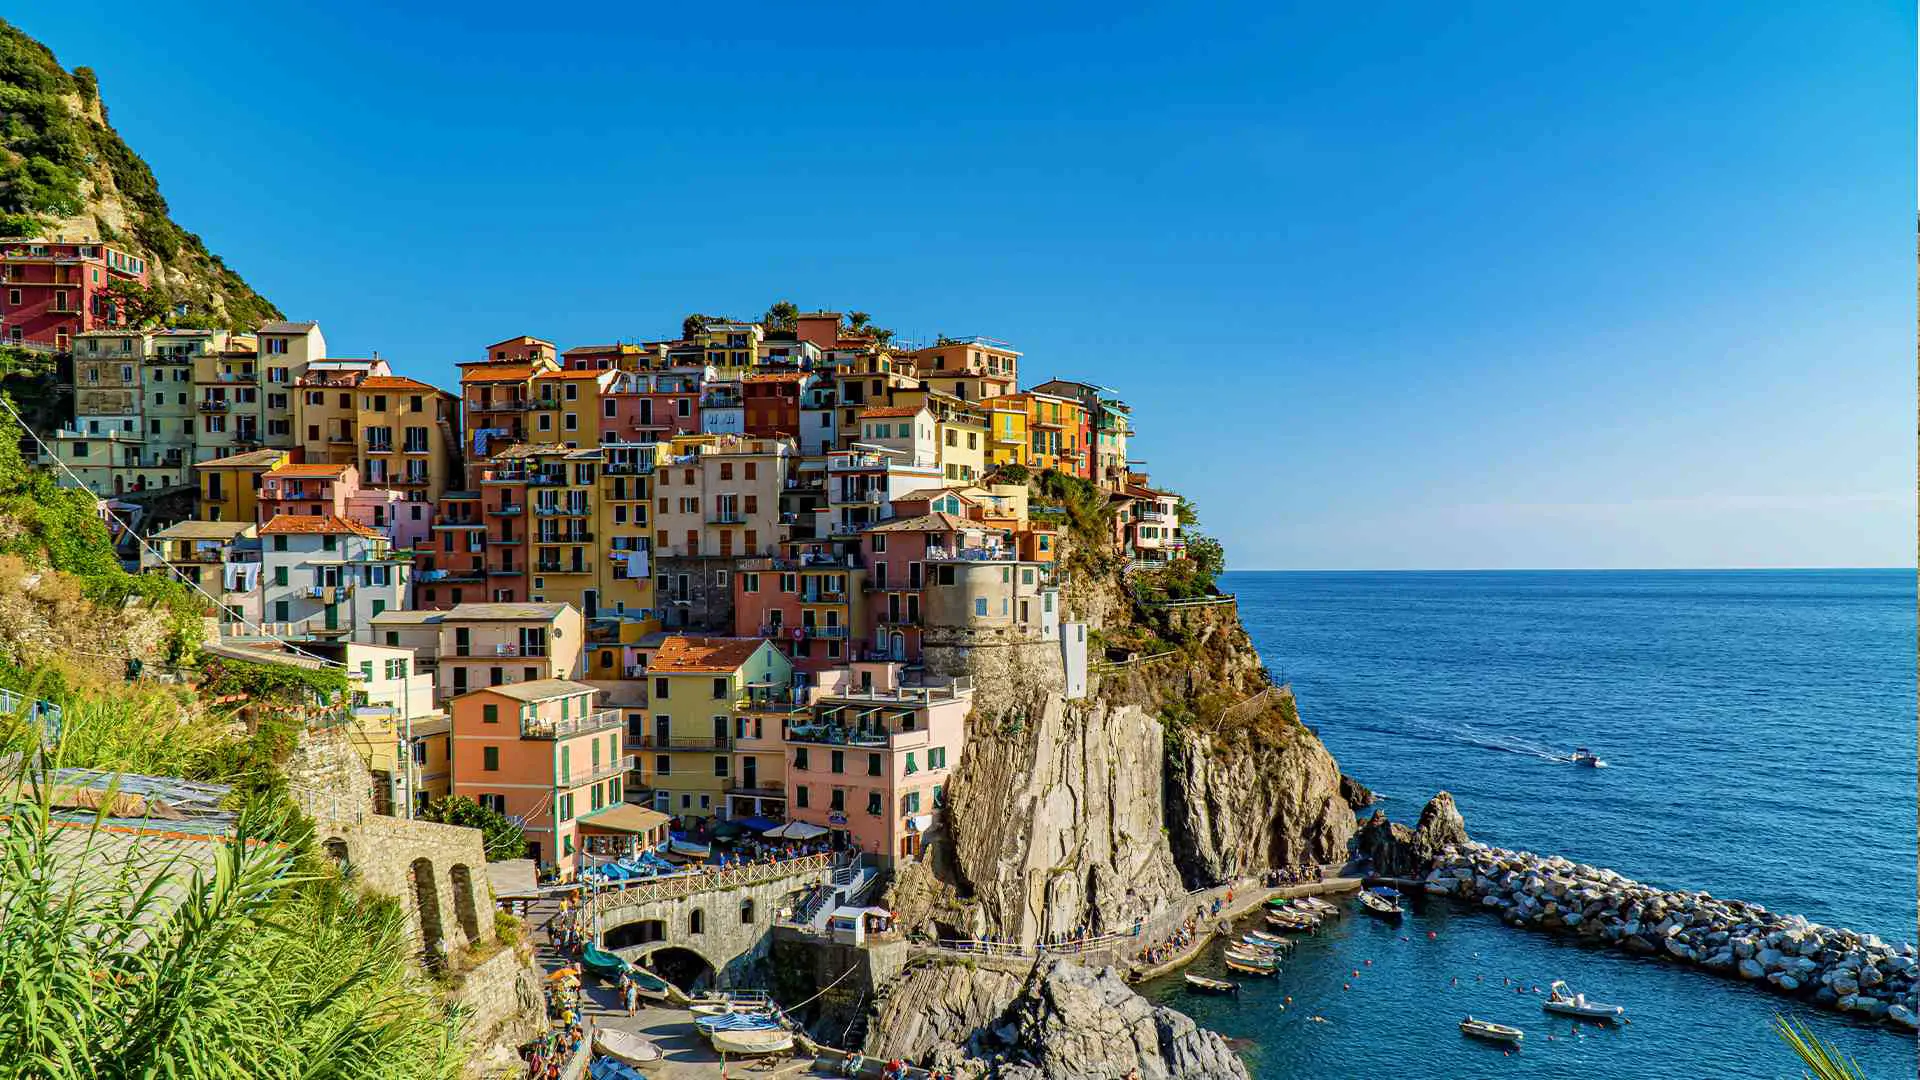 How to Buy Property in Italy as an American?